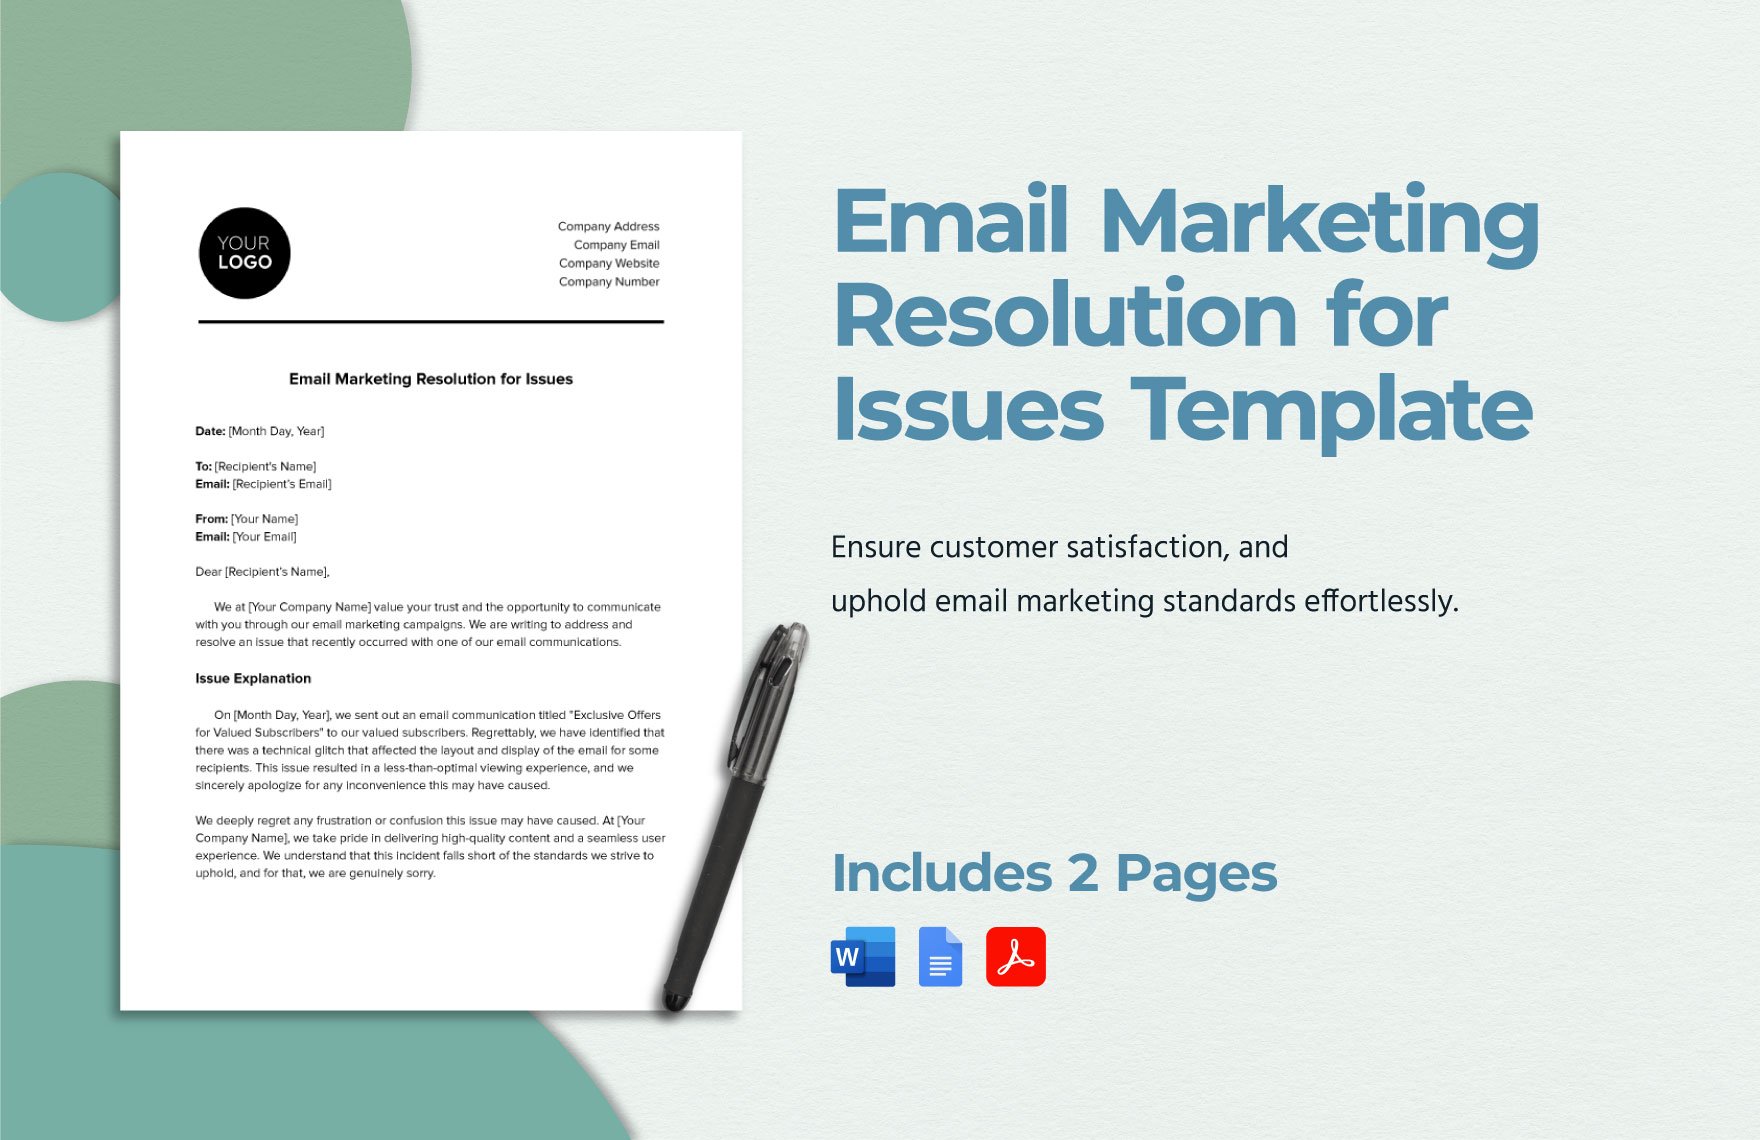 Email Marketing Resolution for Issues Template